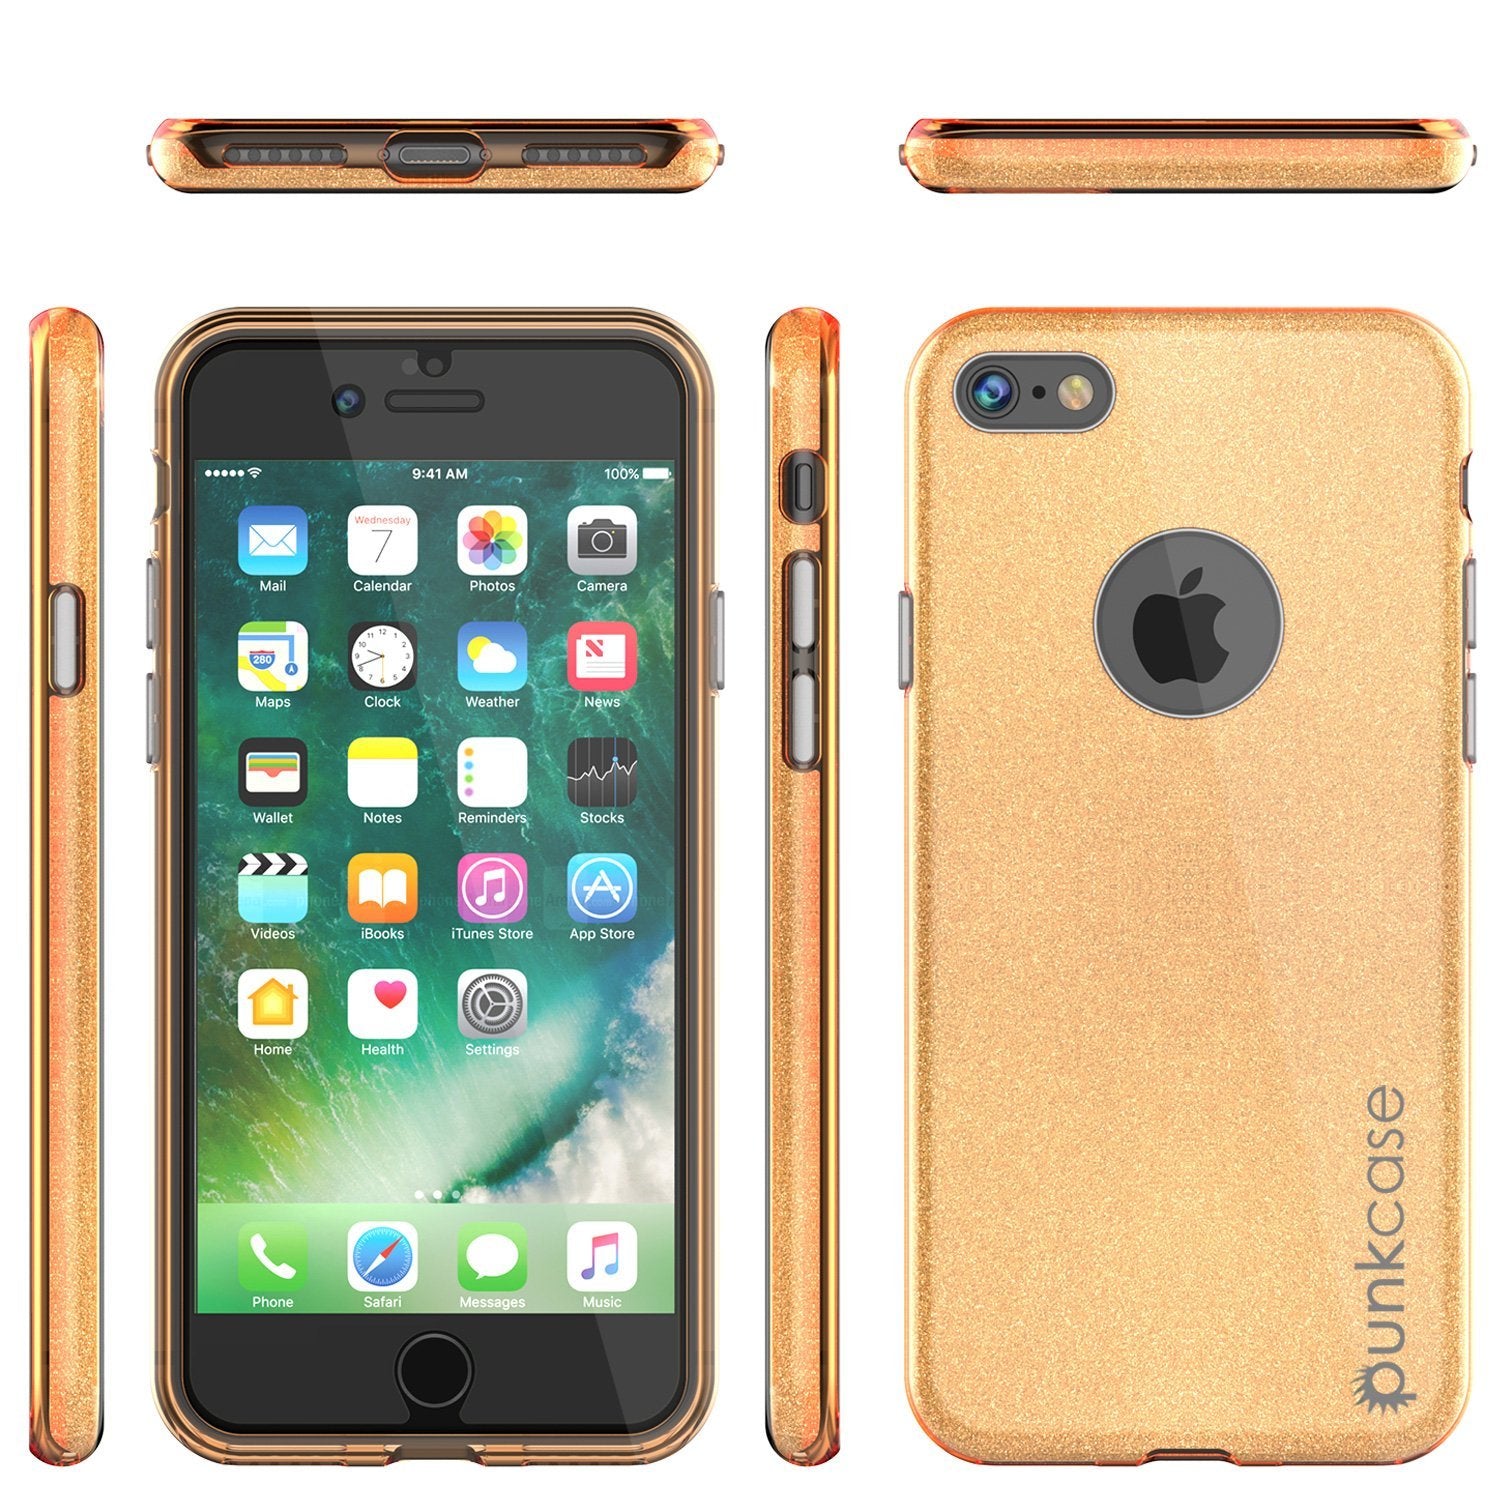 iPhone SE (4.7") Case, Punkcase Galactic 2.0 Series Ultra Slim Protective Armor TPU Cover [Gold]